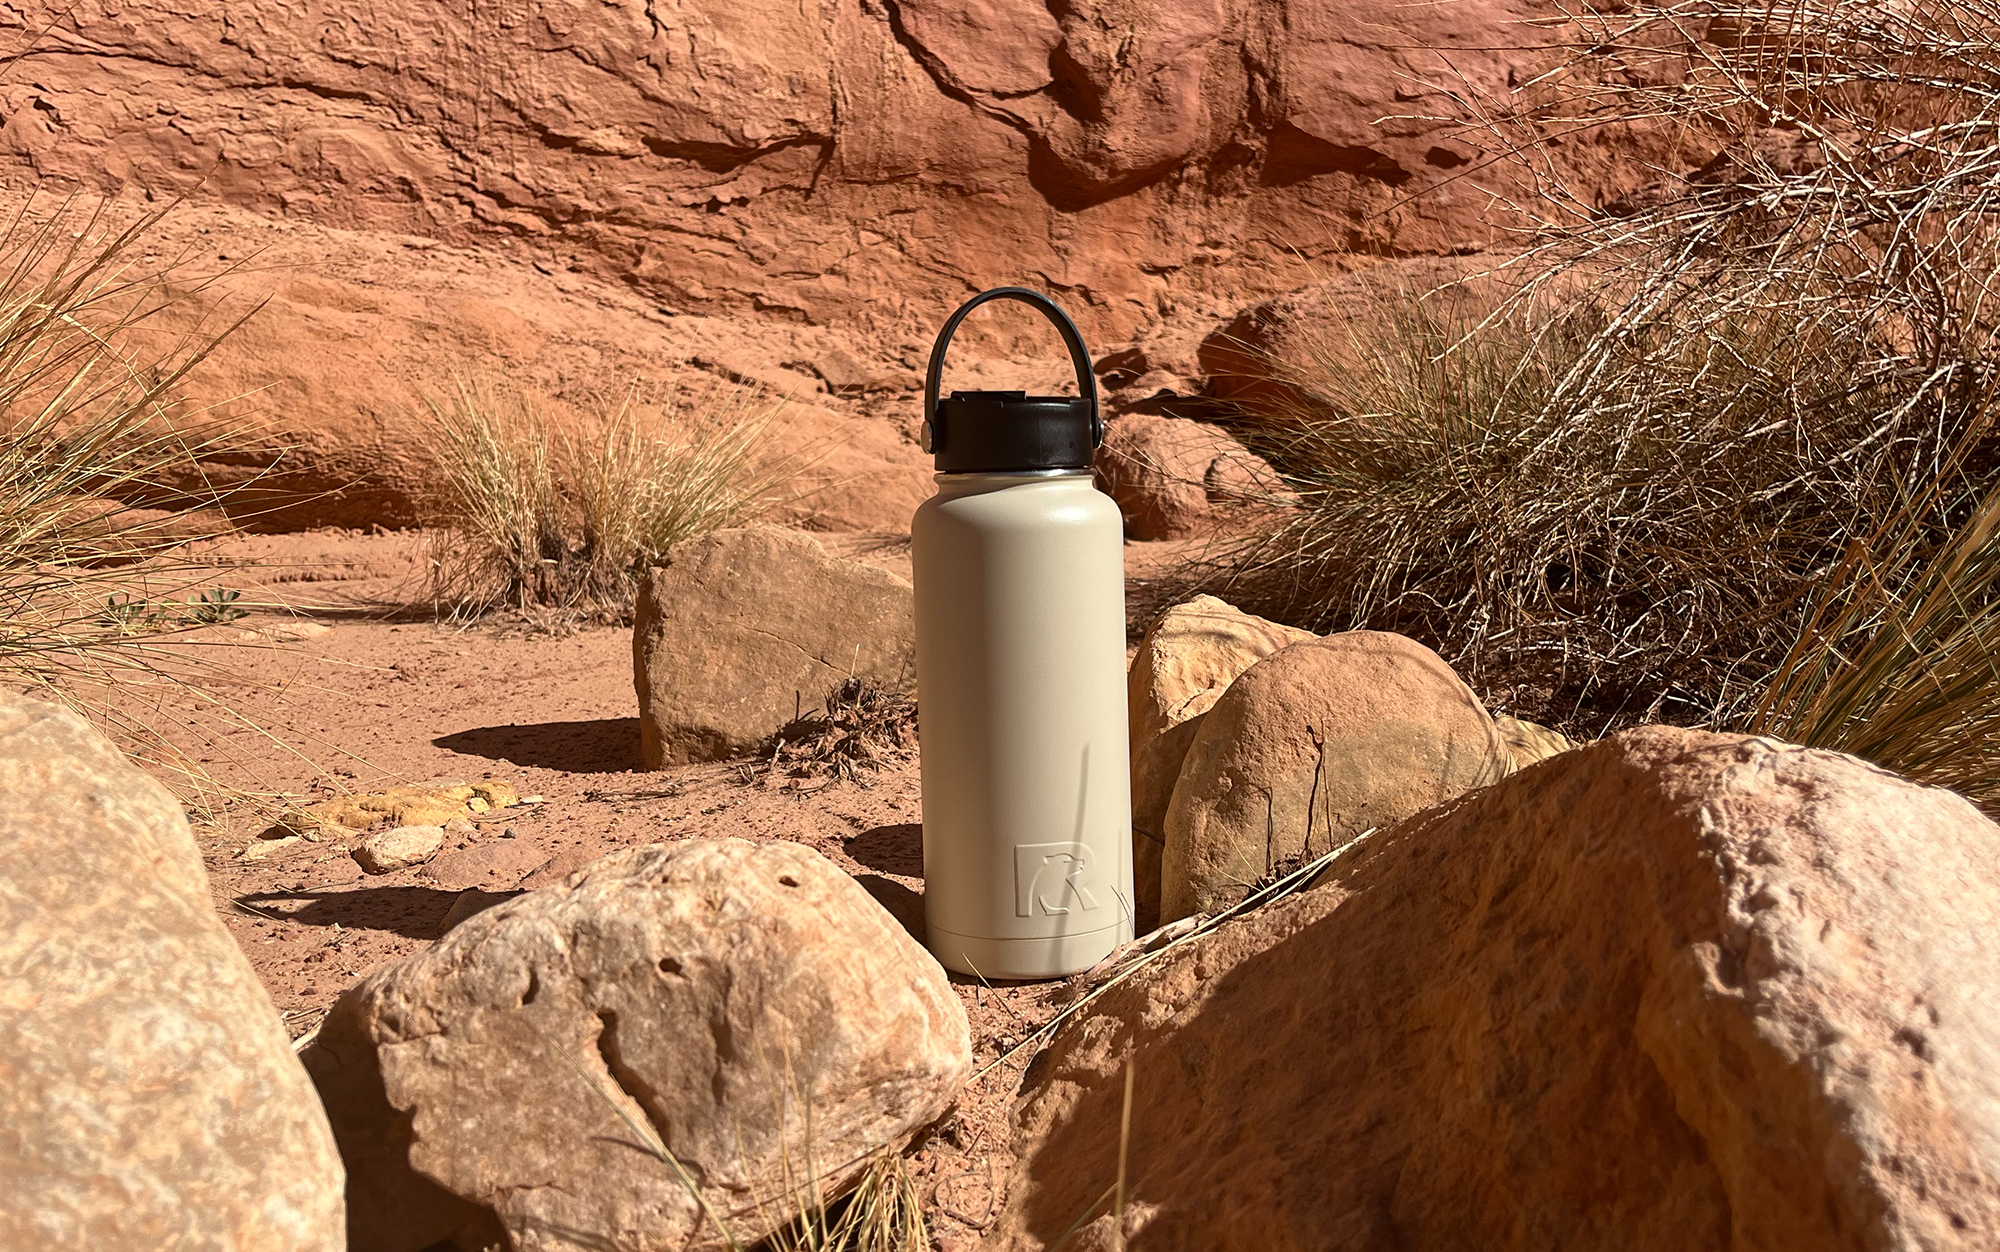 The Rtic is a quality water bottle for a good price.